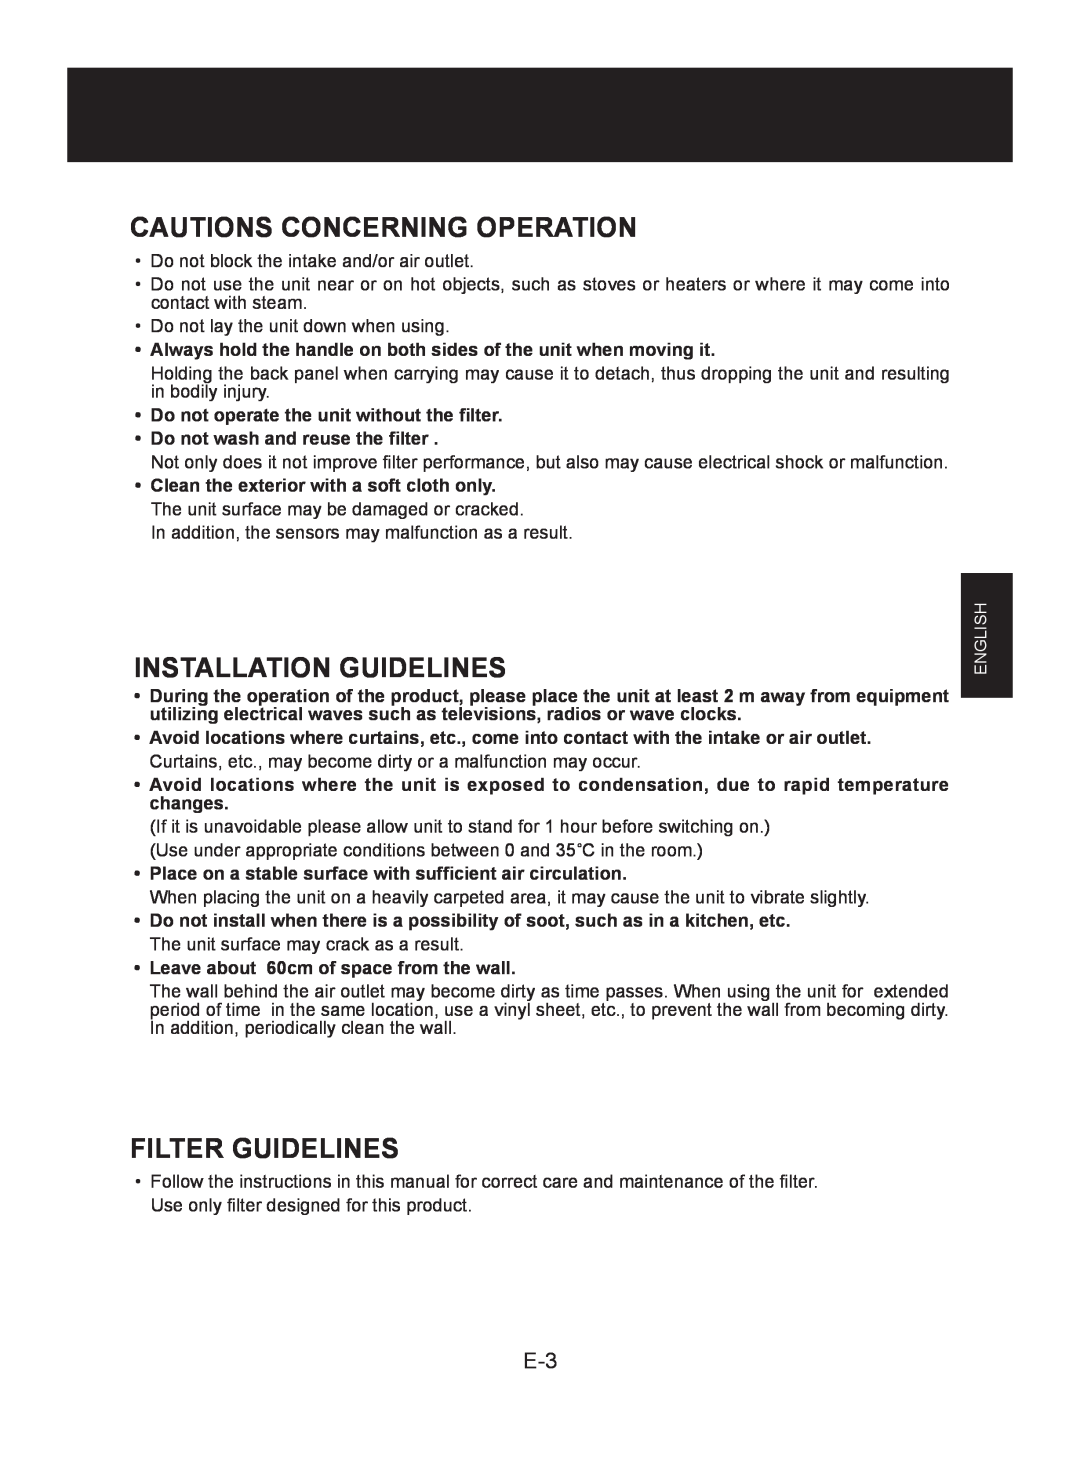 Sharp FU-Z31E operation manual Cautions Concerning Operation, Installation Guidelines, Filter Guidelines 